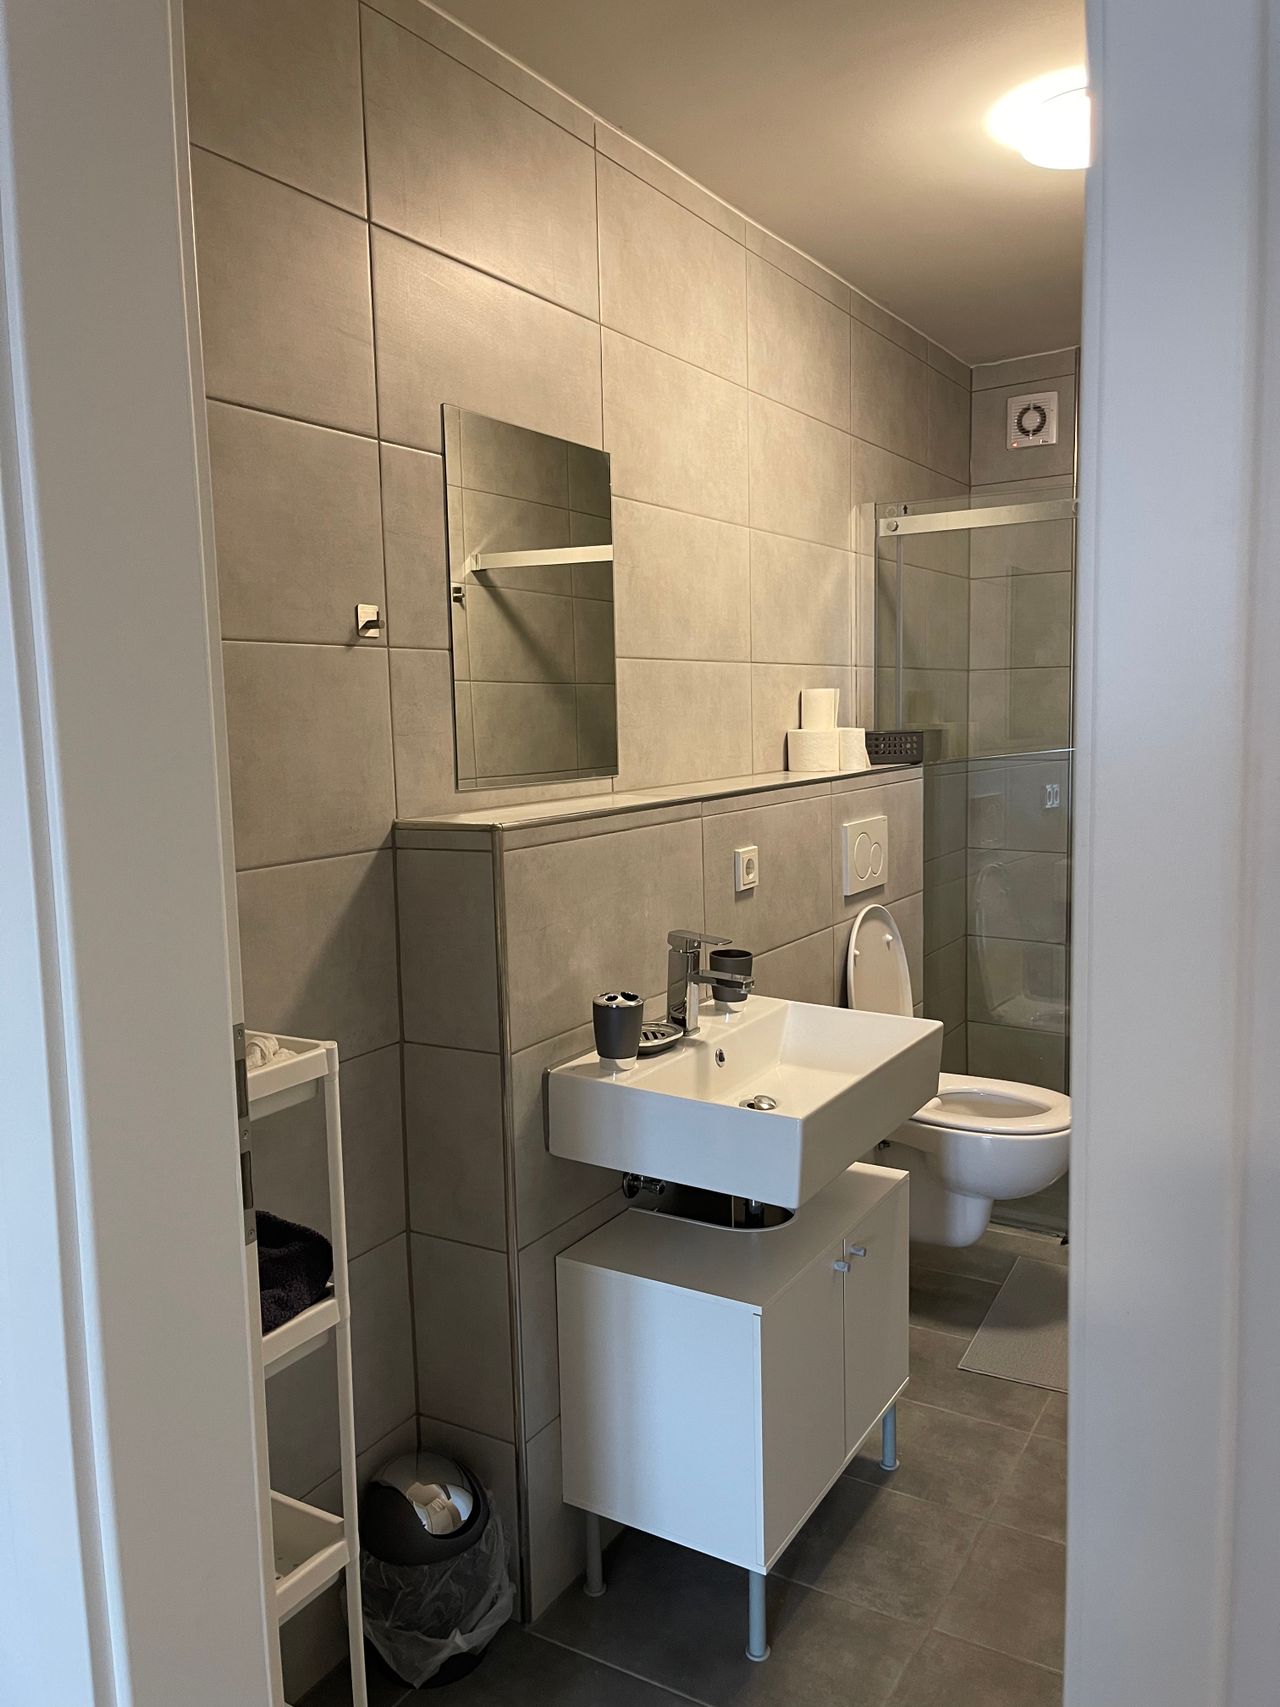 31m² - 200M COLOGNE STATION - CENTRAL - FULL SERVICED - KITCHEN - BATH - WASHING MACHINE - HIGHSPEED-WIFI